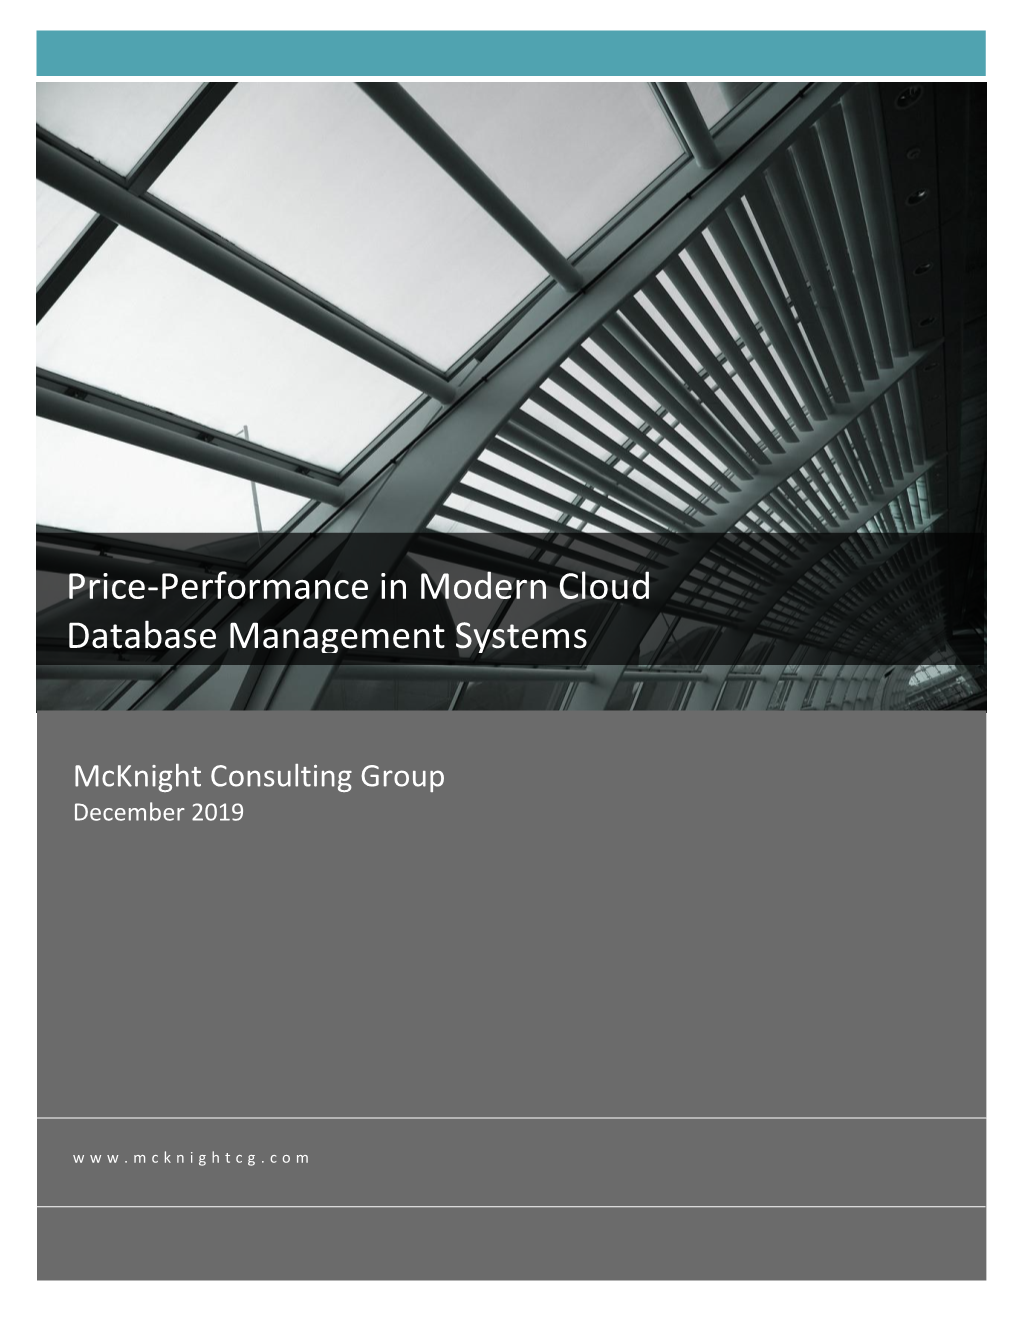 Price-Performance in Modern Cloud Database Management Systems